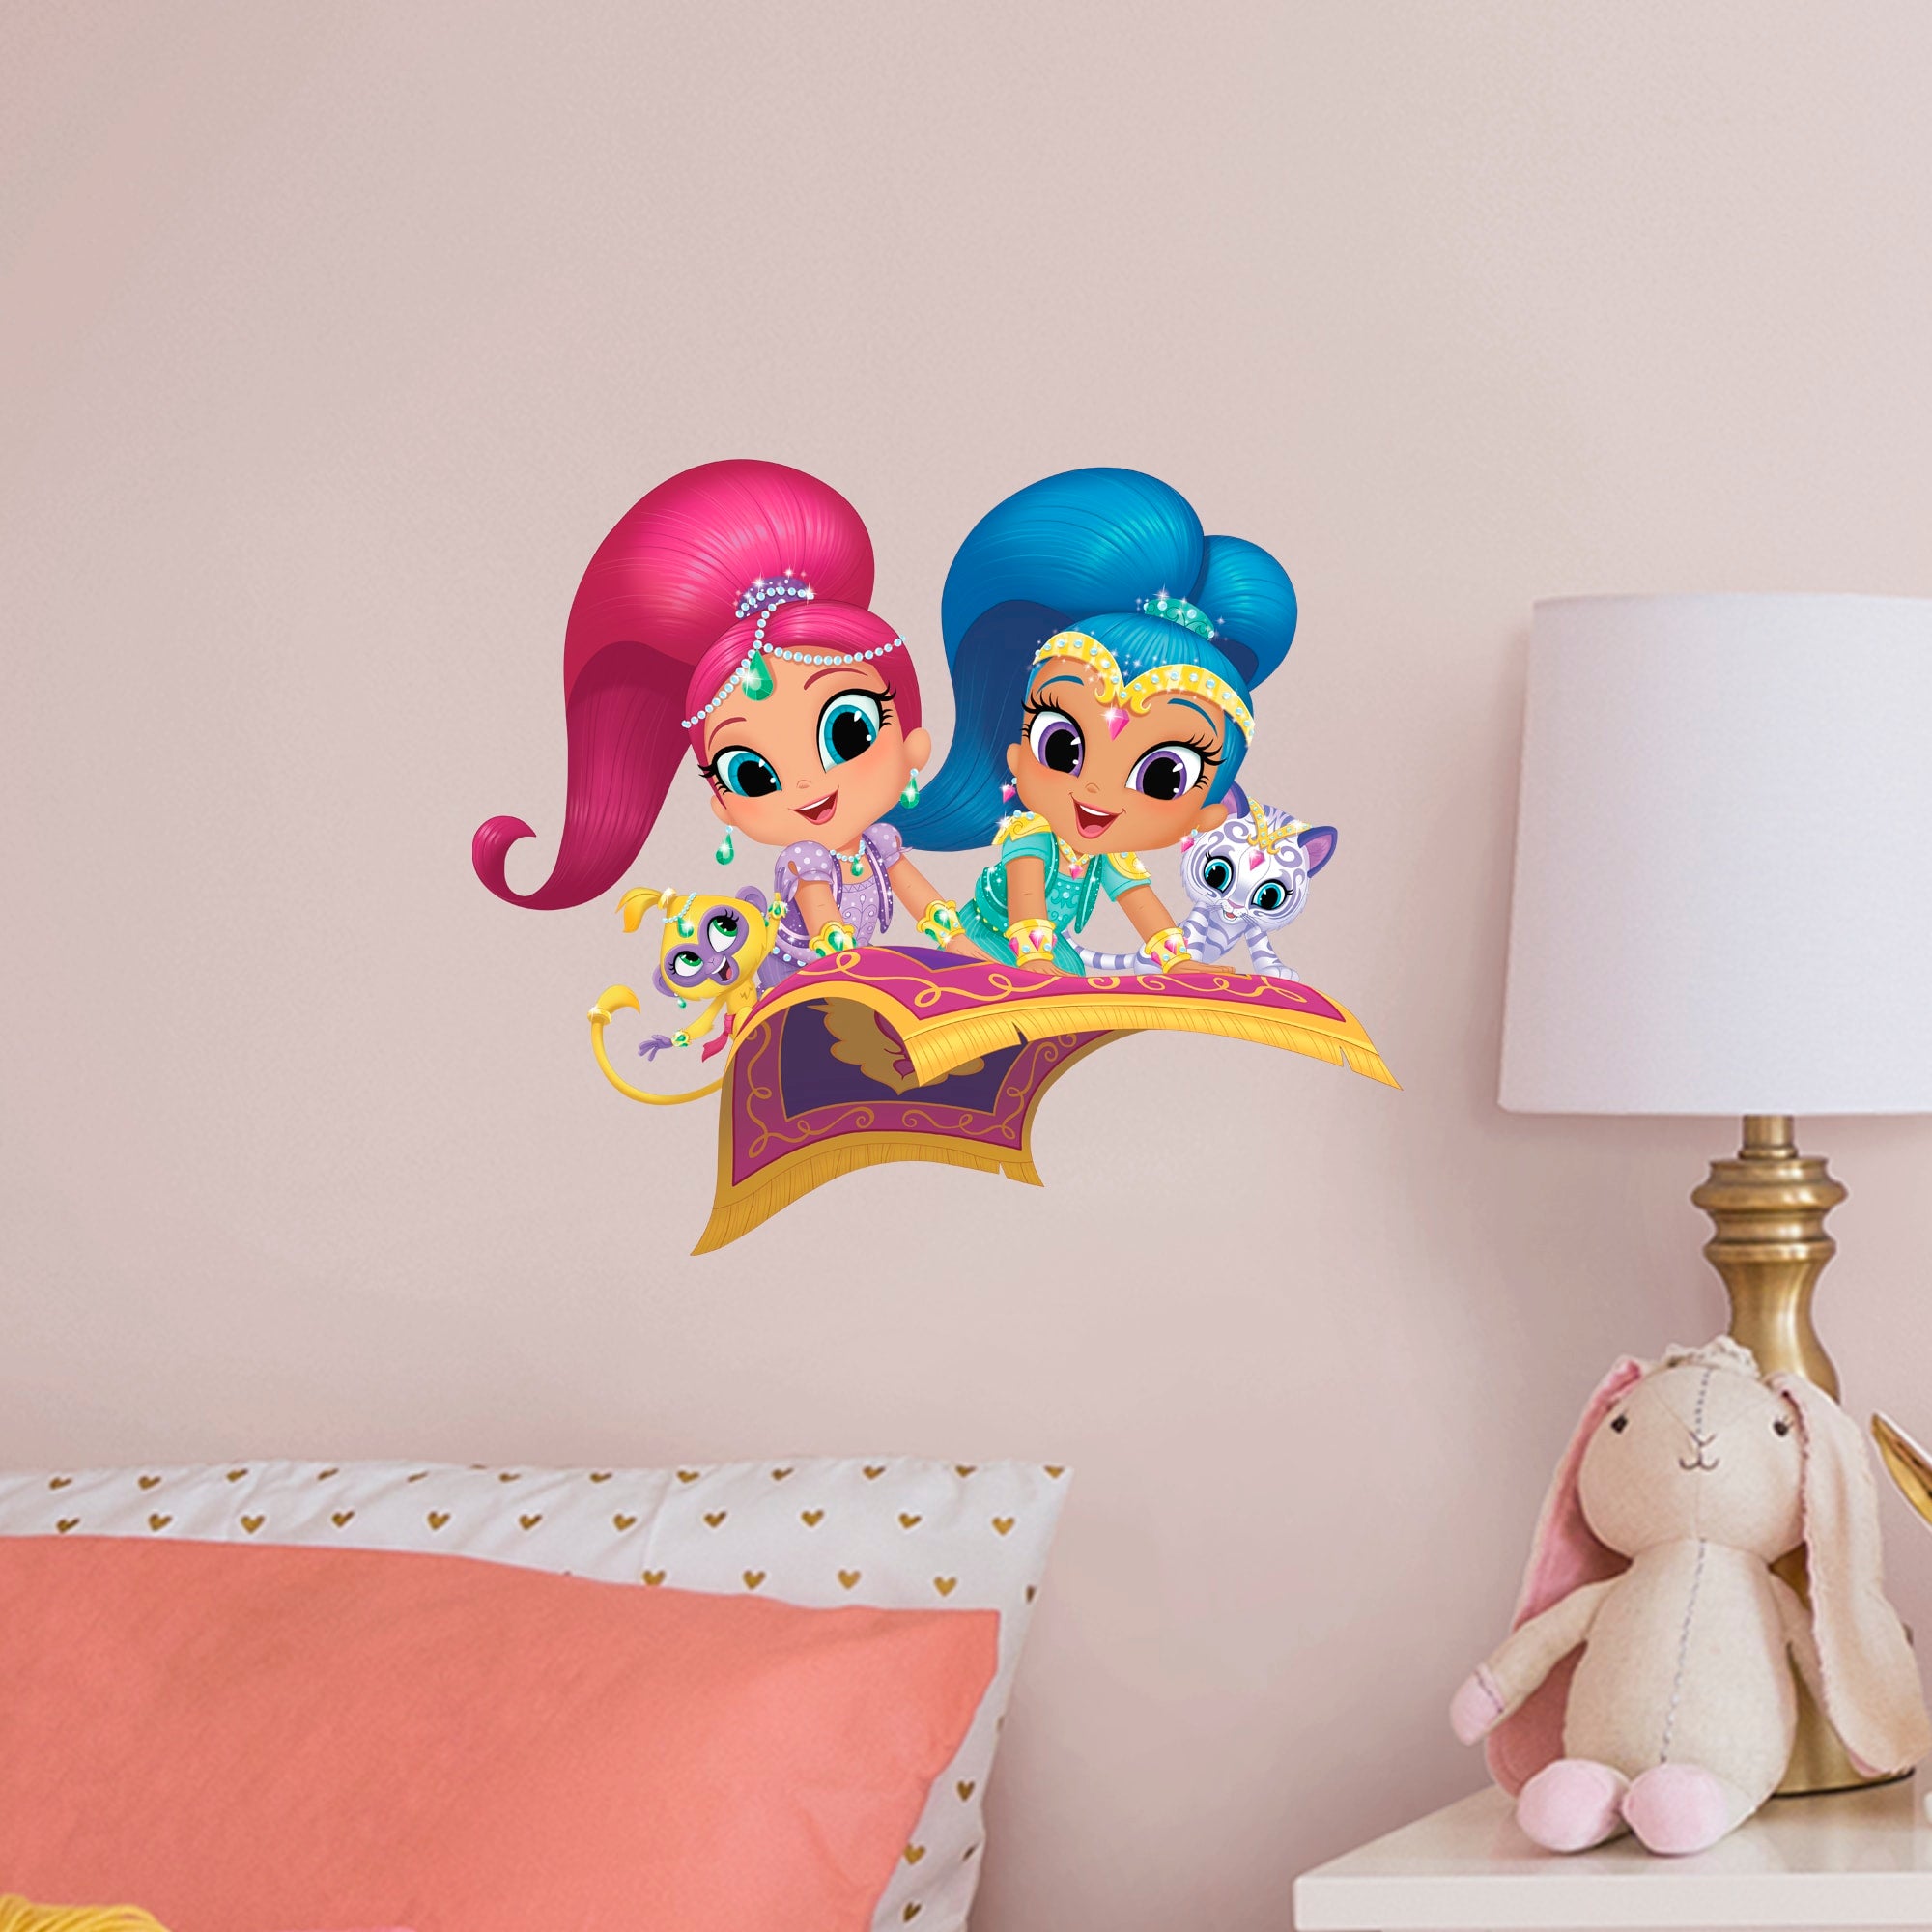 Shimmer and Shine - Officially Licensed Nickelodeon Removable Wall Decal Large by Fathead | Vinyl